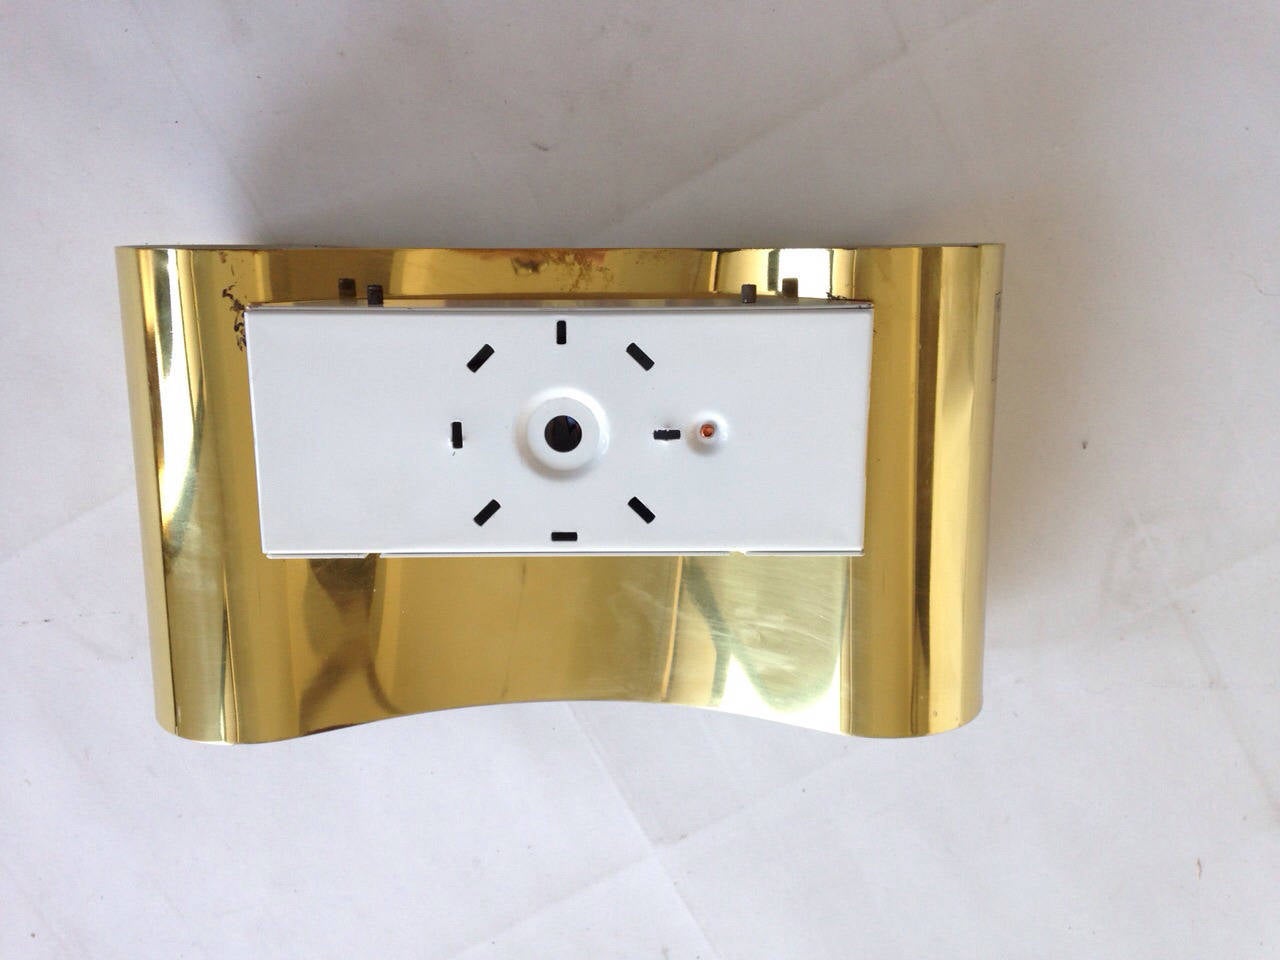 set of 16 wall lamps, model Foglio, was designed by Tobia Scarpa for Flos in 1966. It features brass frames welded and painted bent. This set is still in good vintage condition. This model brass today is not produced.